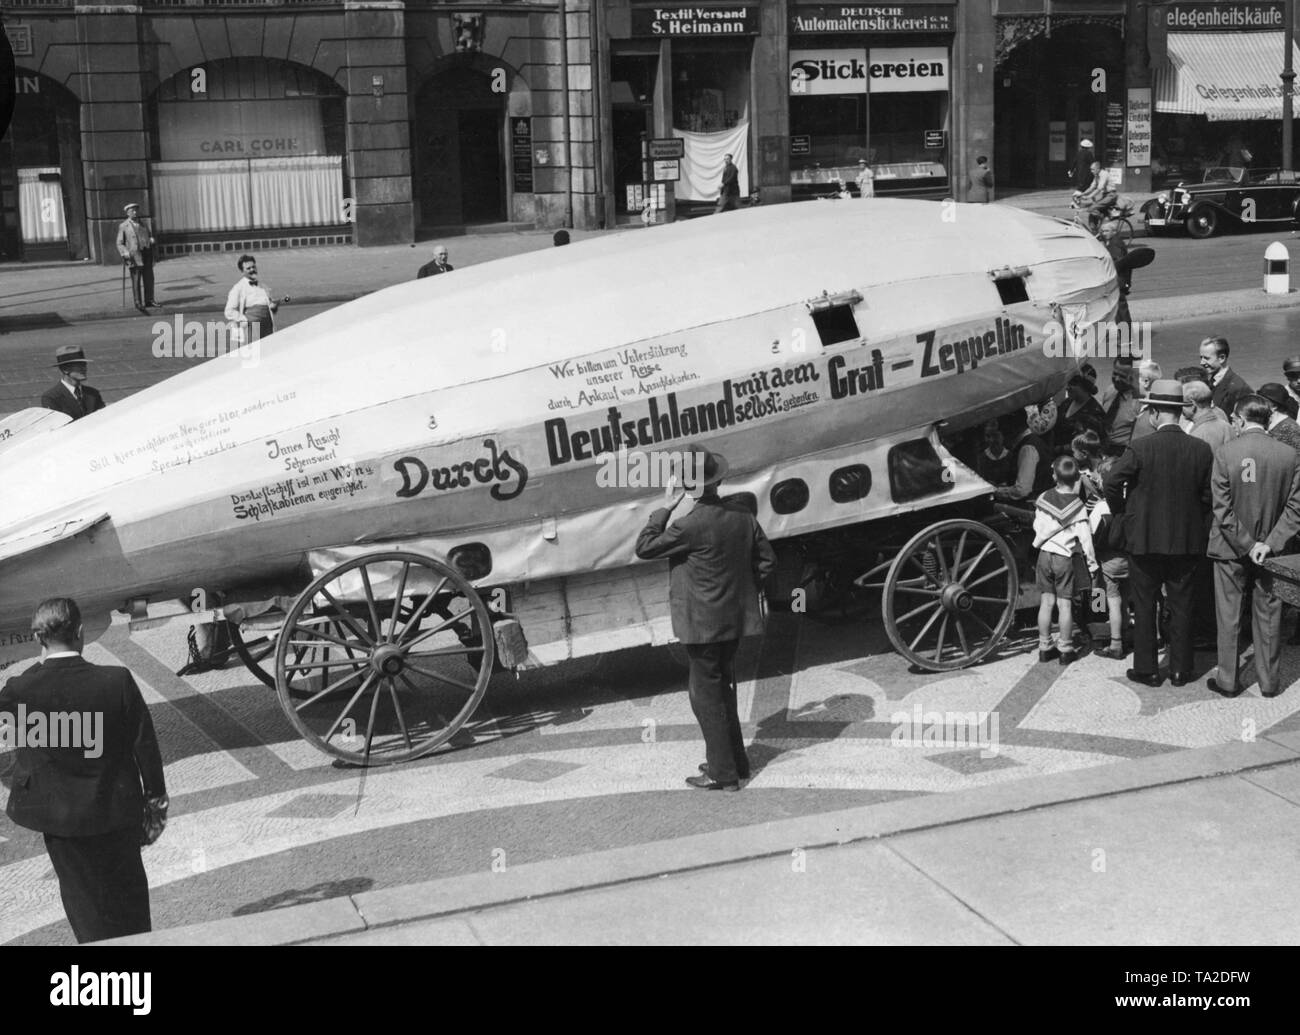 Unemployed people travel through Germany with a self-made zeppelin. The airship with a swastika pennant on the hull is viewed by passers at Hackescher Markt in Berlin-Mitte. In the background are the shops 'Carl Cohn A.G.', 'Textil-Versand S. Heimann', 'Deutsche Automatenstickerei' and 'Gelegenheitseinkaeufe'. Stock Photo